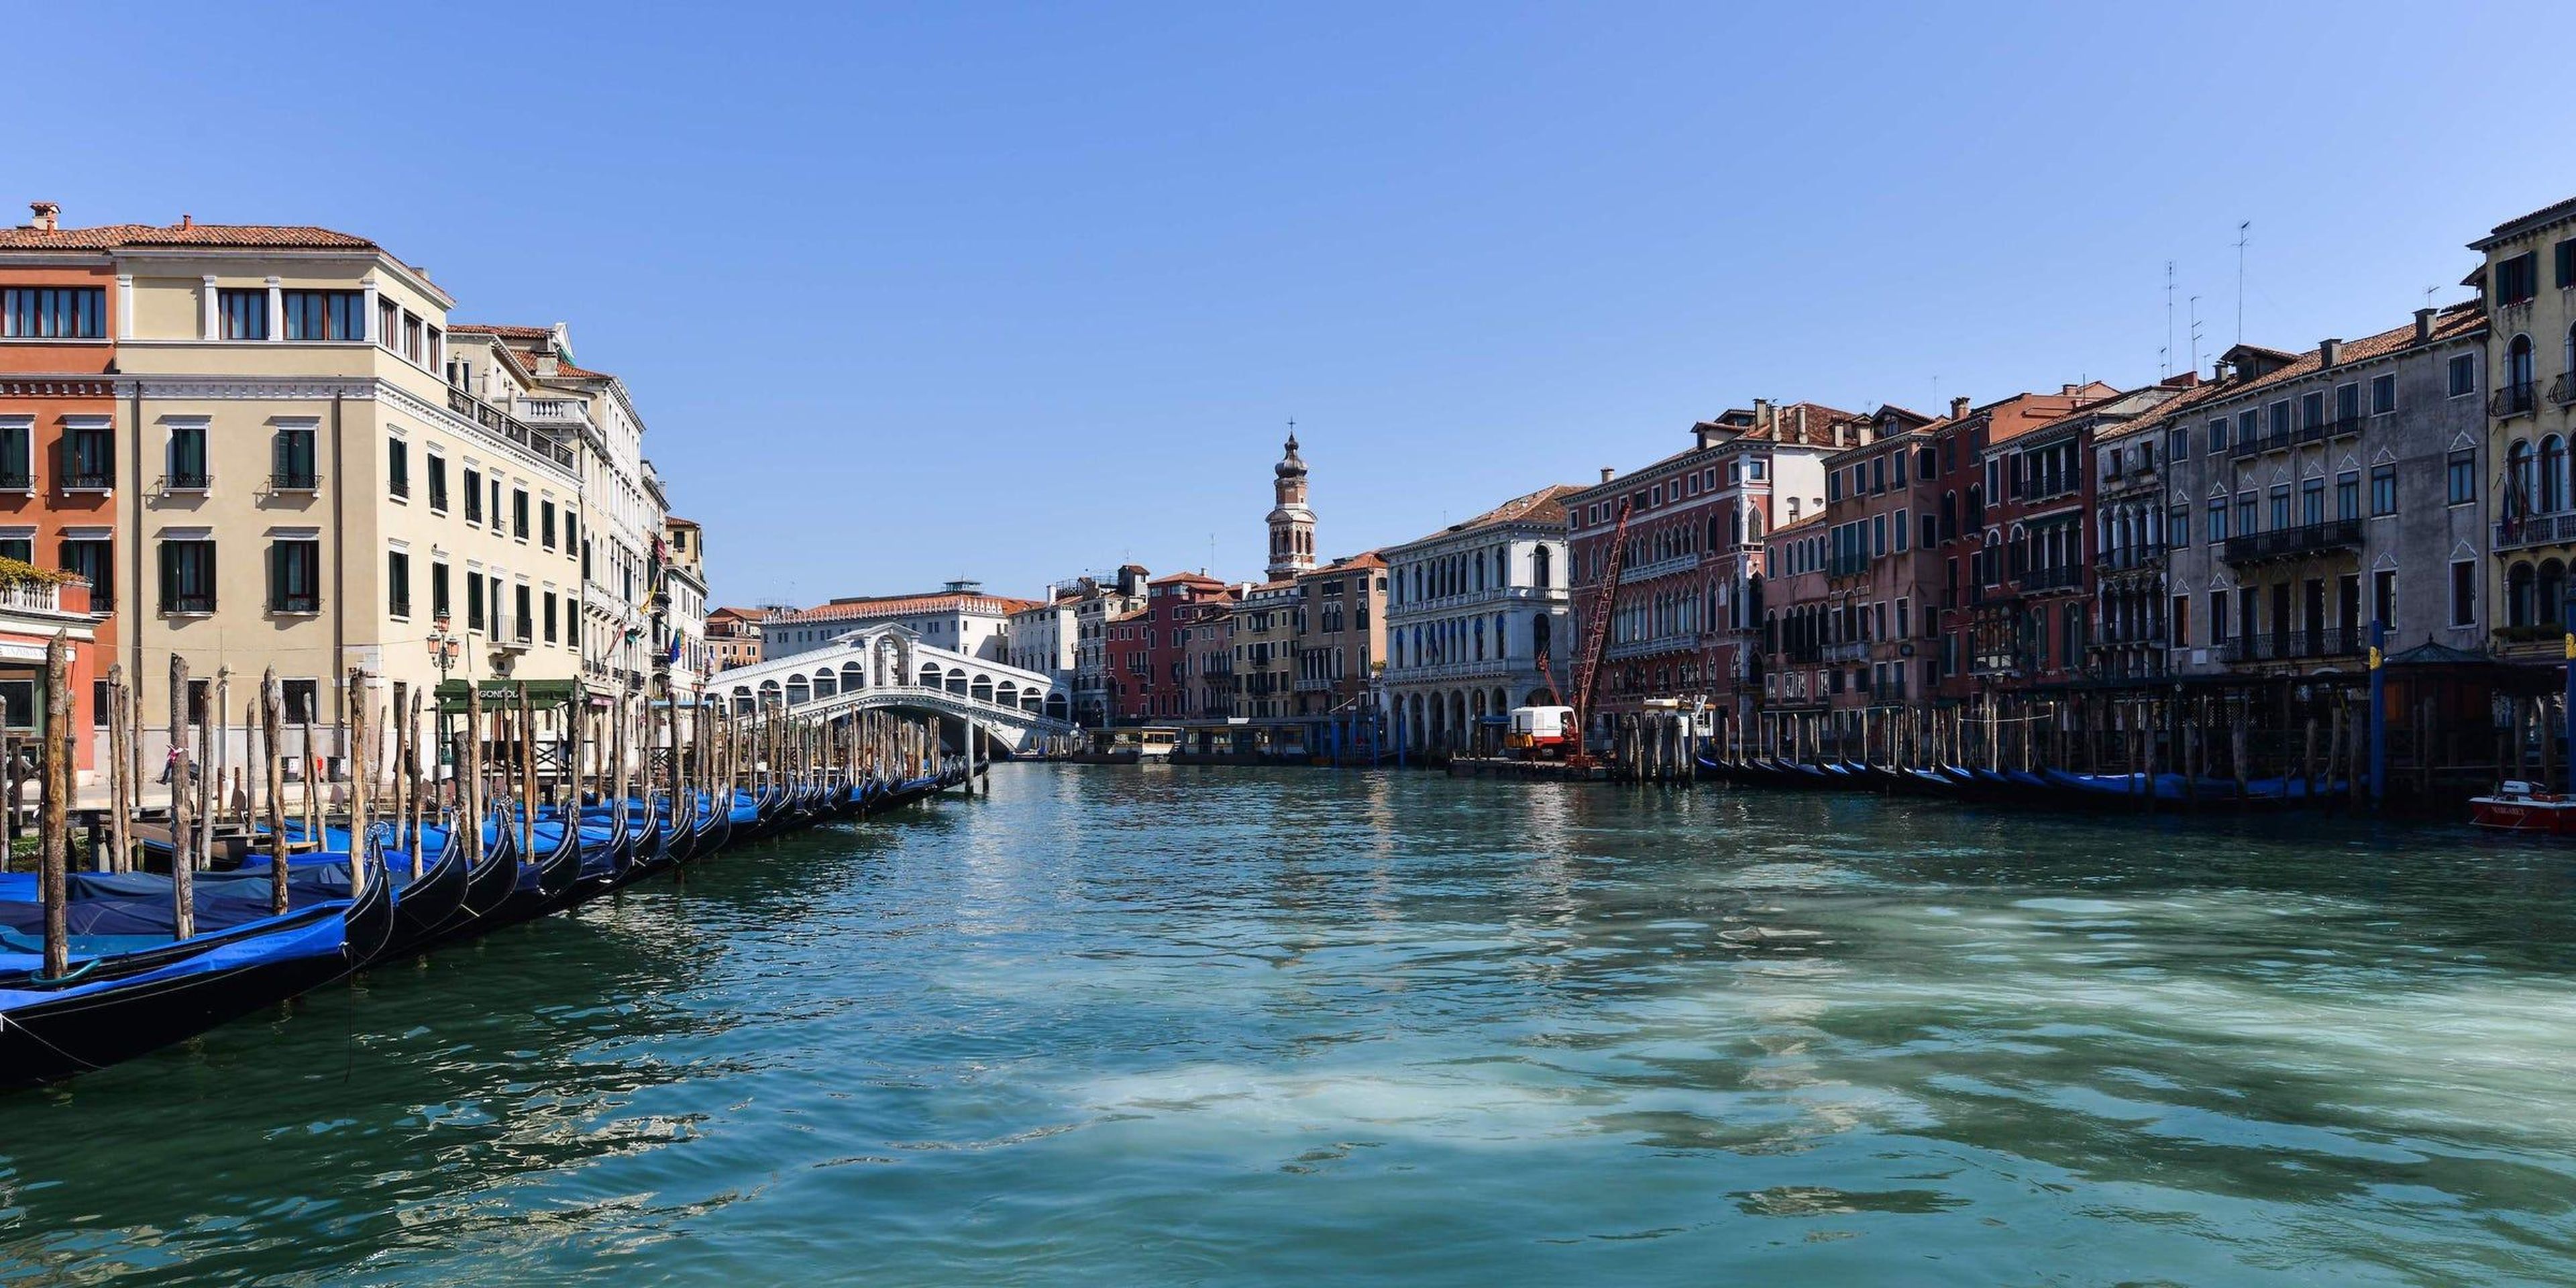 A general view shows clear waters of the Grand Canal near the Rialto Bridge in Venice on March 18, 2020, as a result of the stoppage of motorboat traffic, following the country's lockdown within the new coronavirus crisis.